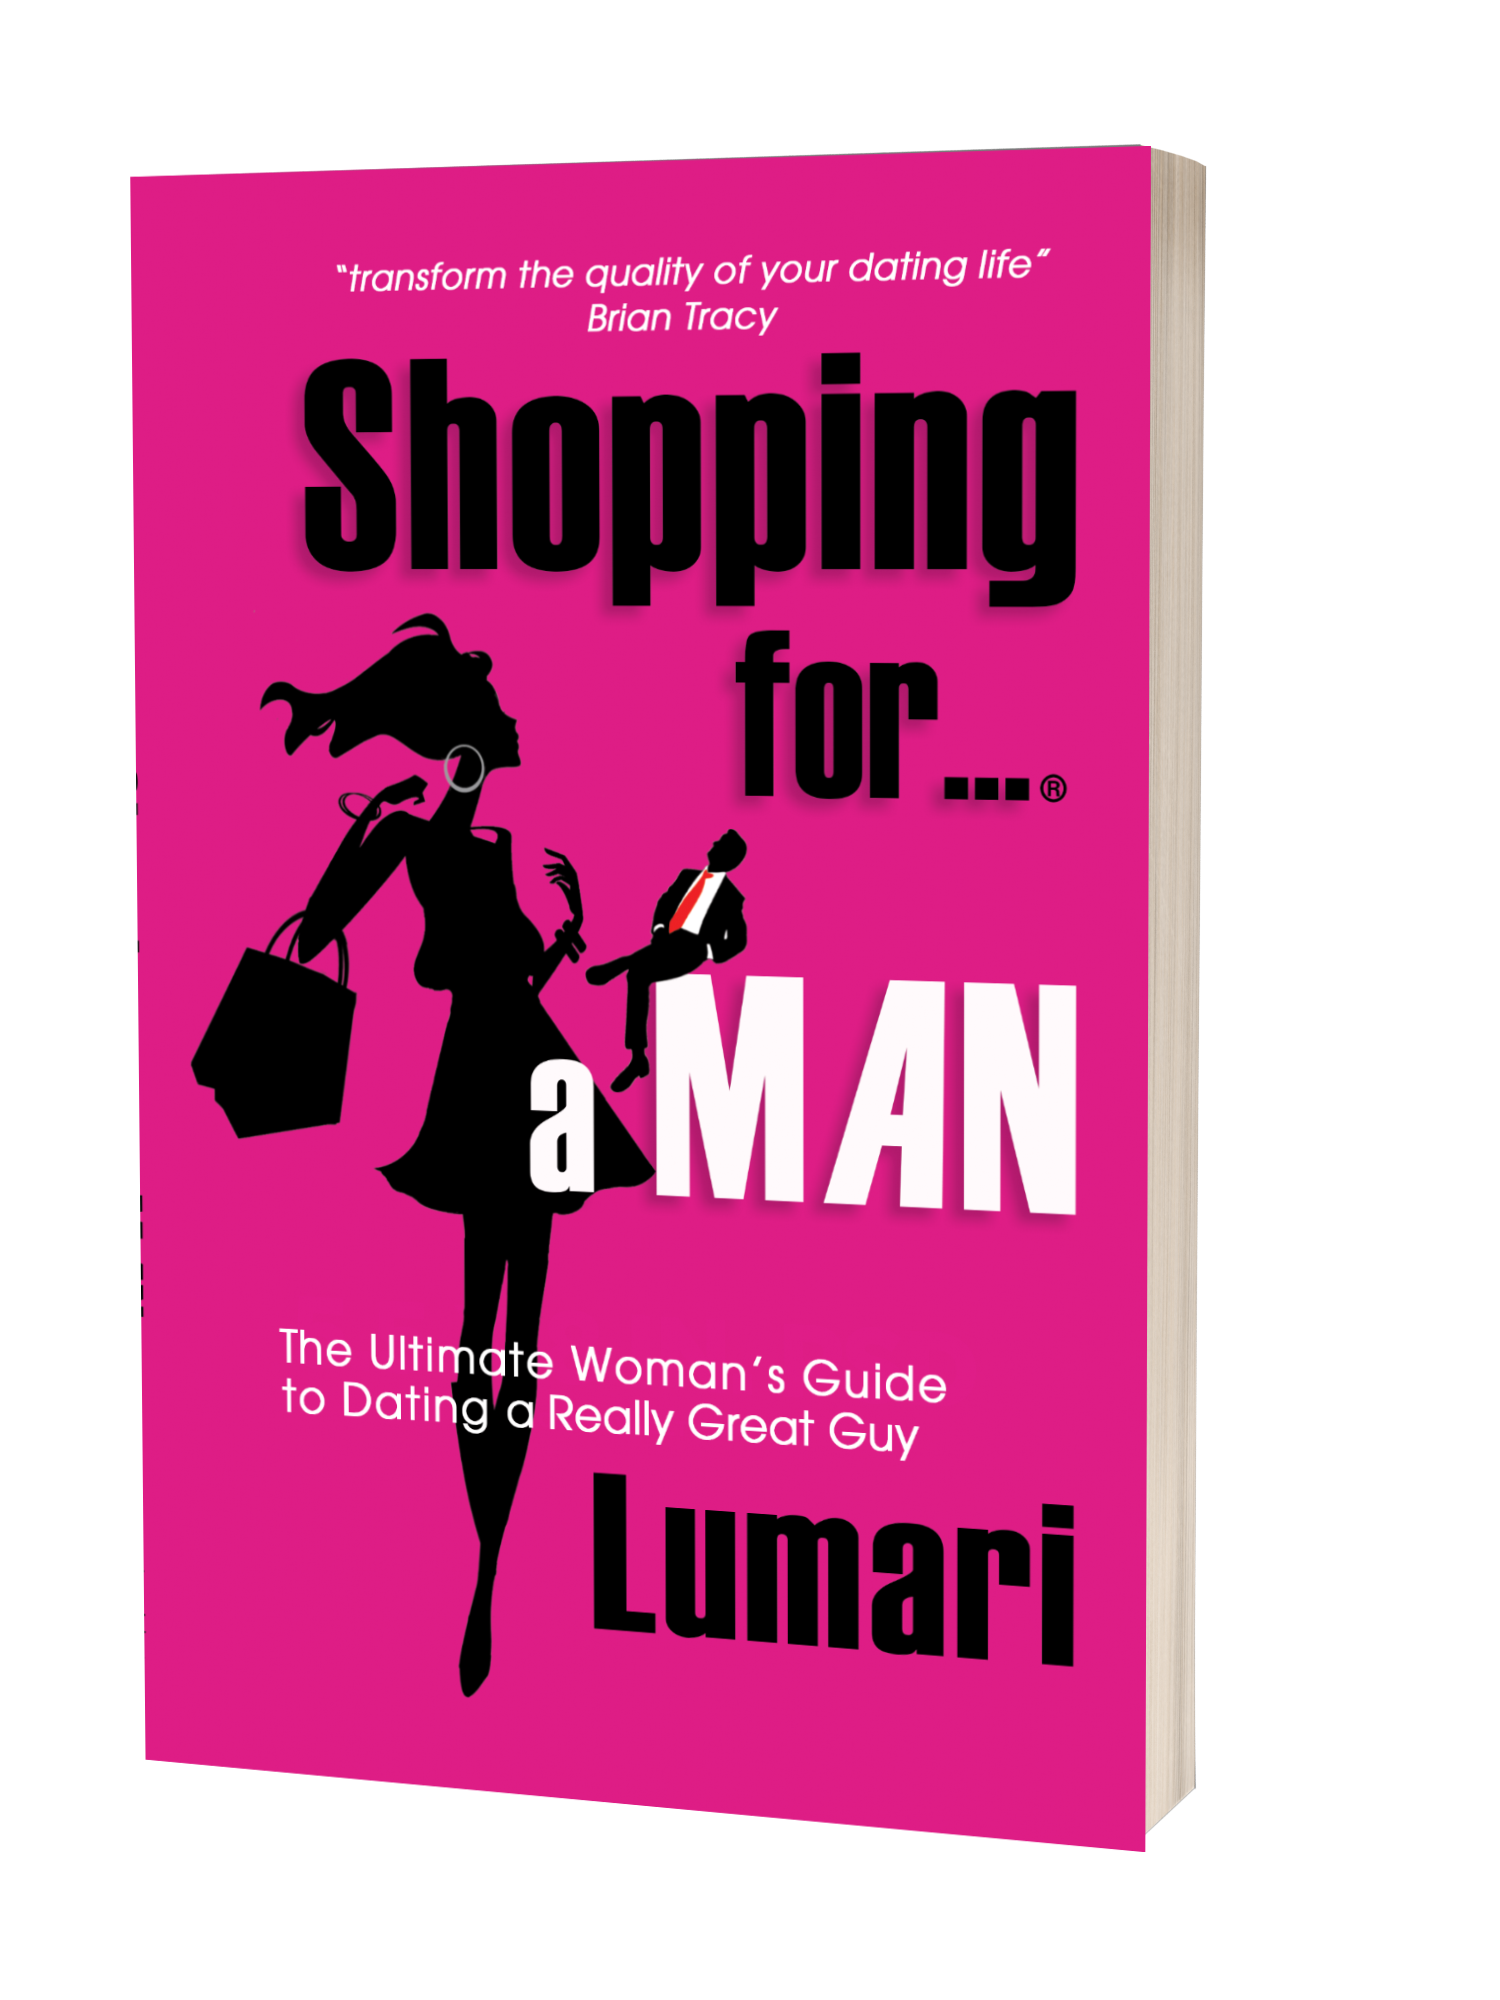 Shopping for a Man